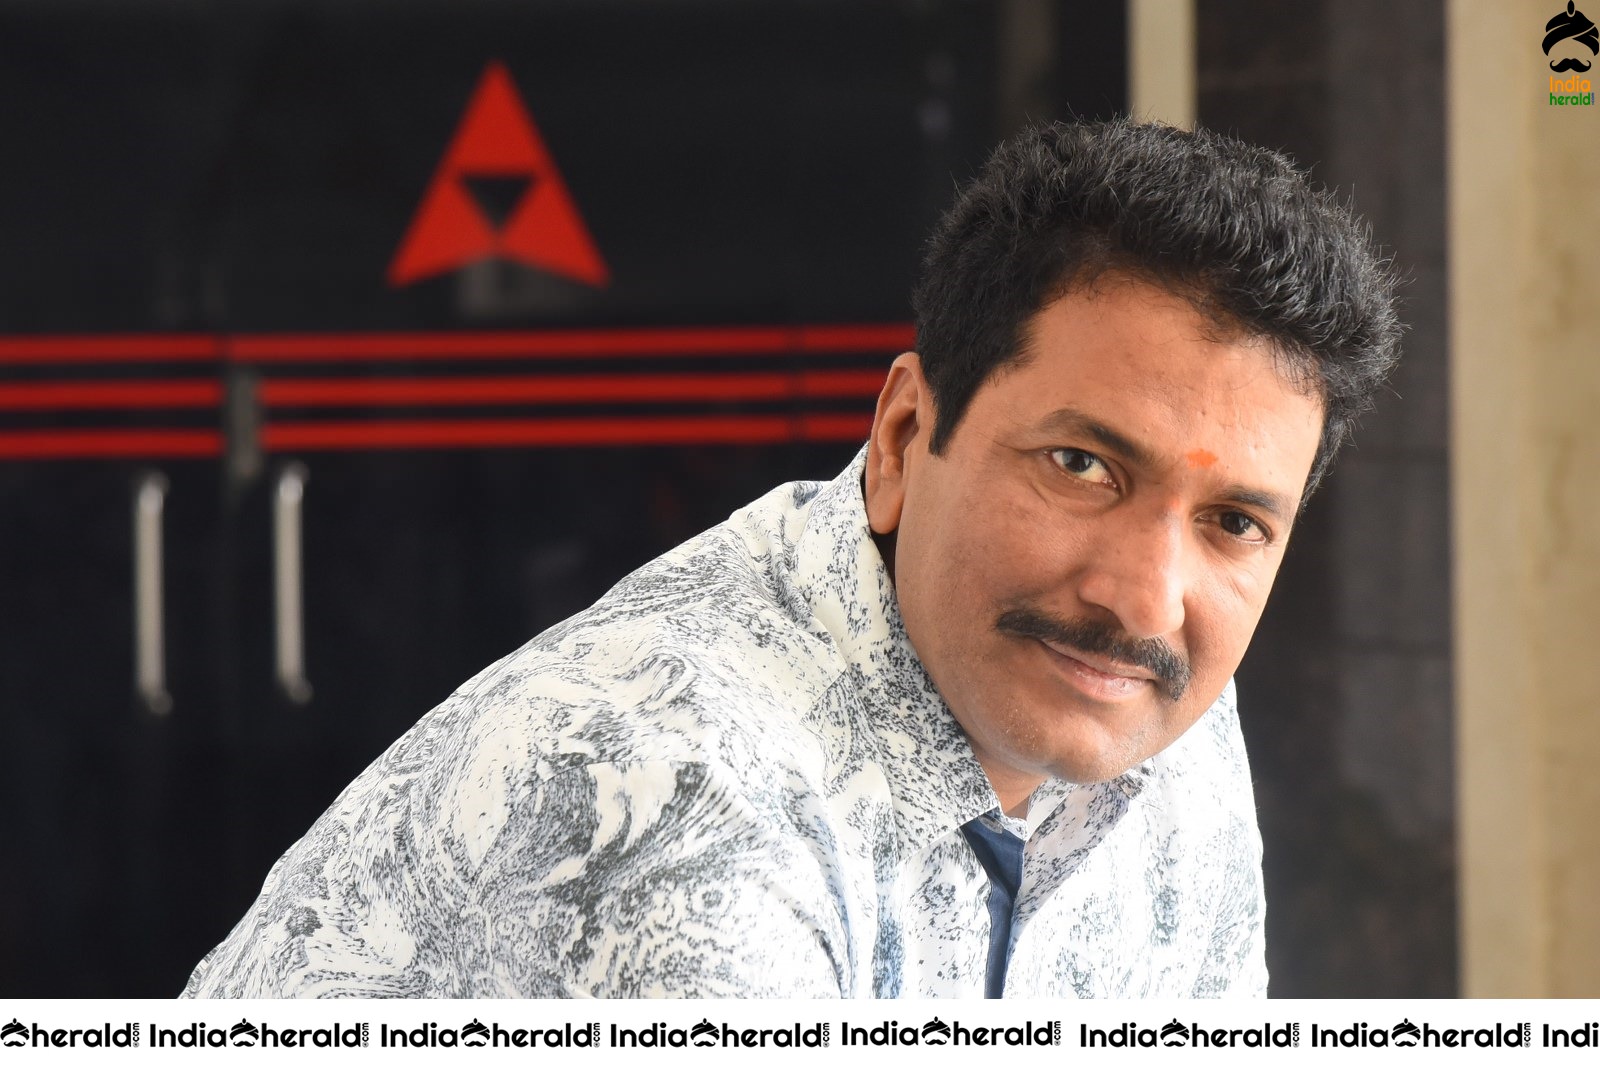 Producer Anil Sunkar speaks about his future projects under his banner